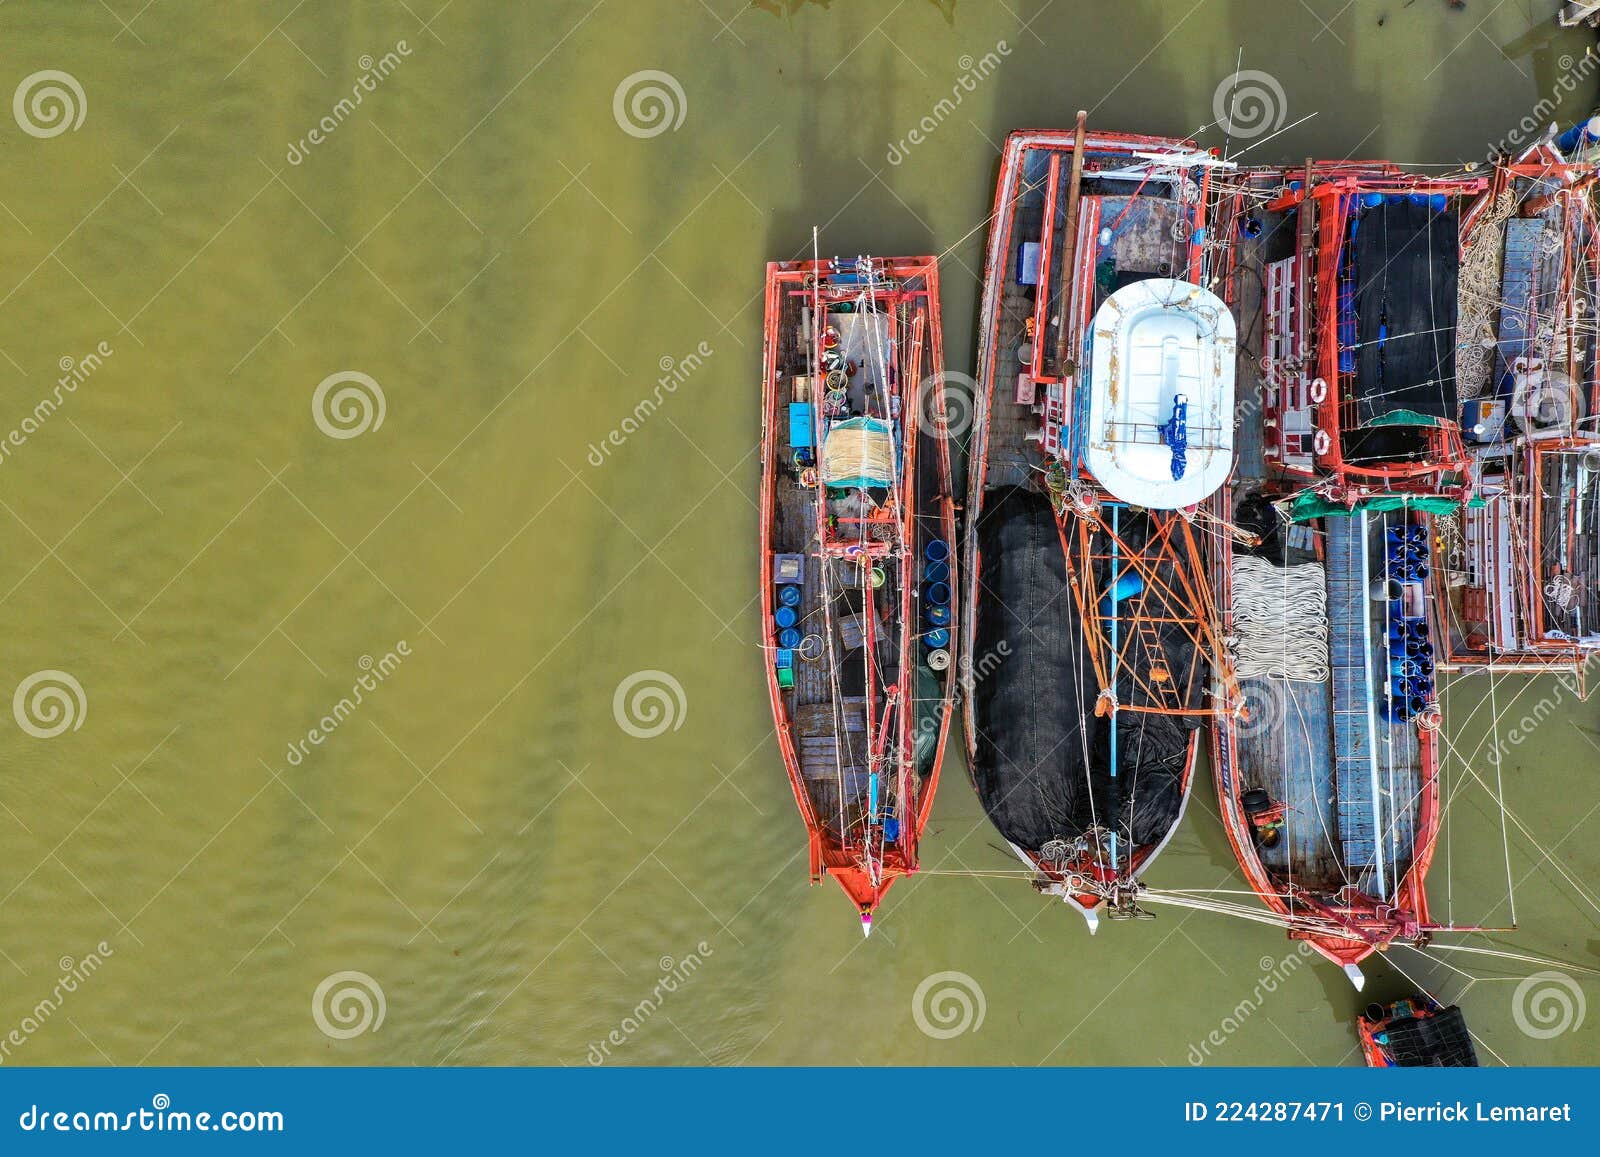 Aerial View Of Rayong River And Fishing Boats In Rayong Thailand Stock